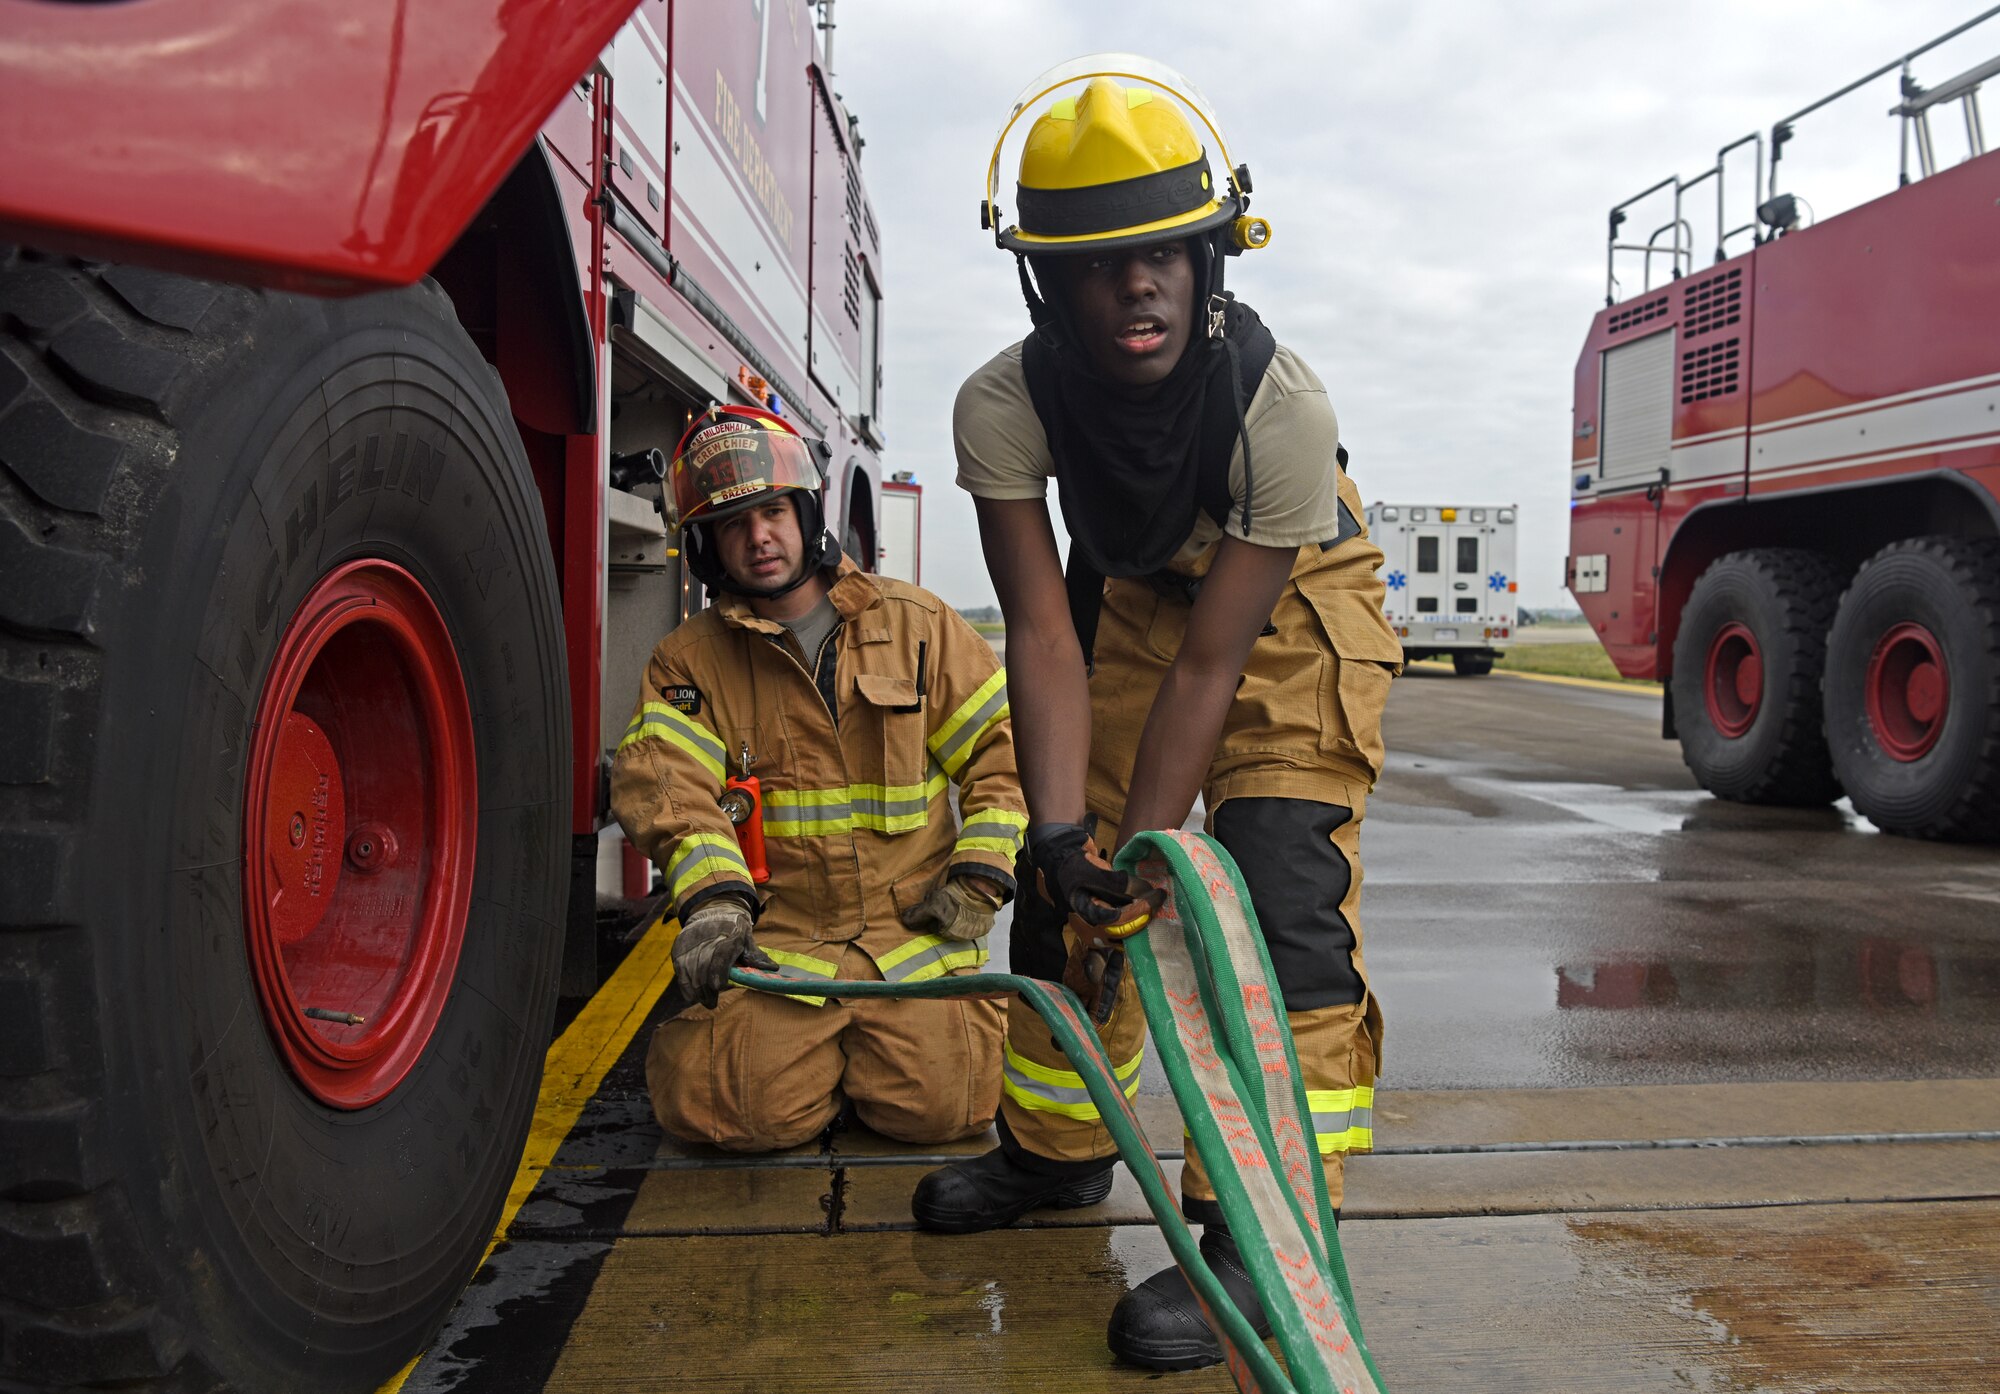 Firefighters with the 100th Civil Engineer Squadron secure a hose during a training exercise simulating a cockpit fire aboard a KC-135 Stratotanker at RAF Mildenhall, England, Oct. 22, 2019. Hands-on training is performed quarterly by the fire department to help keep firefighters familiar with the interior layout of the aircraft and proper shut-down procedures. (U.S. Air Force photo by Senior Airman Brandon Esau)